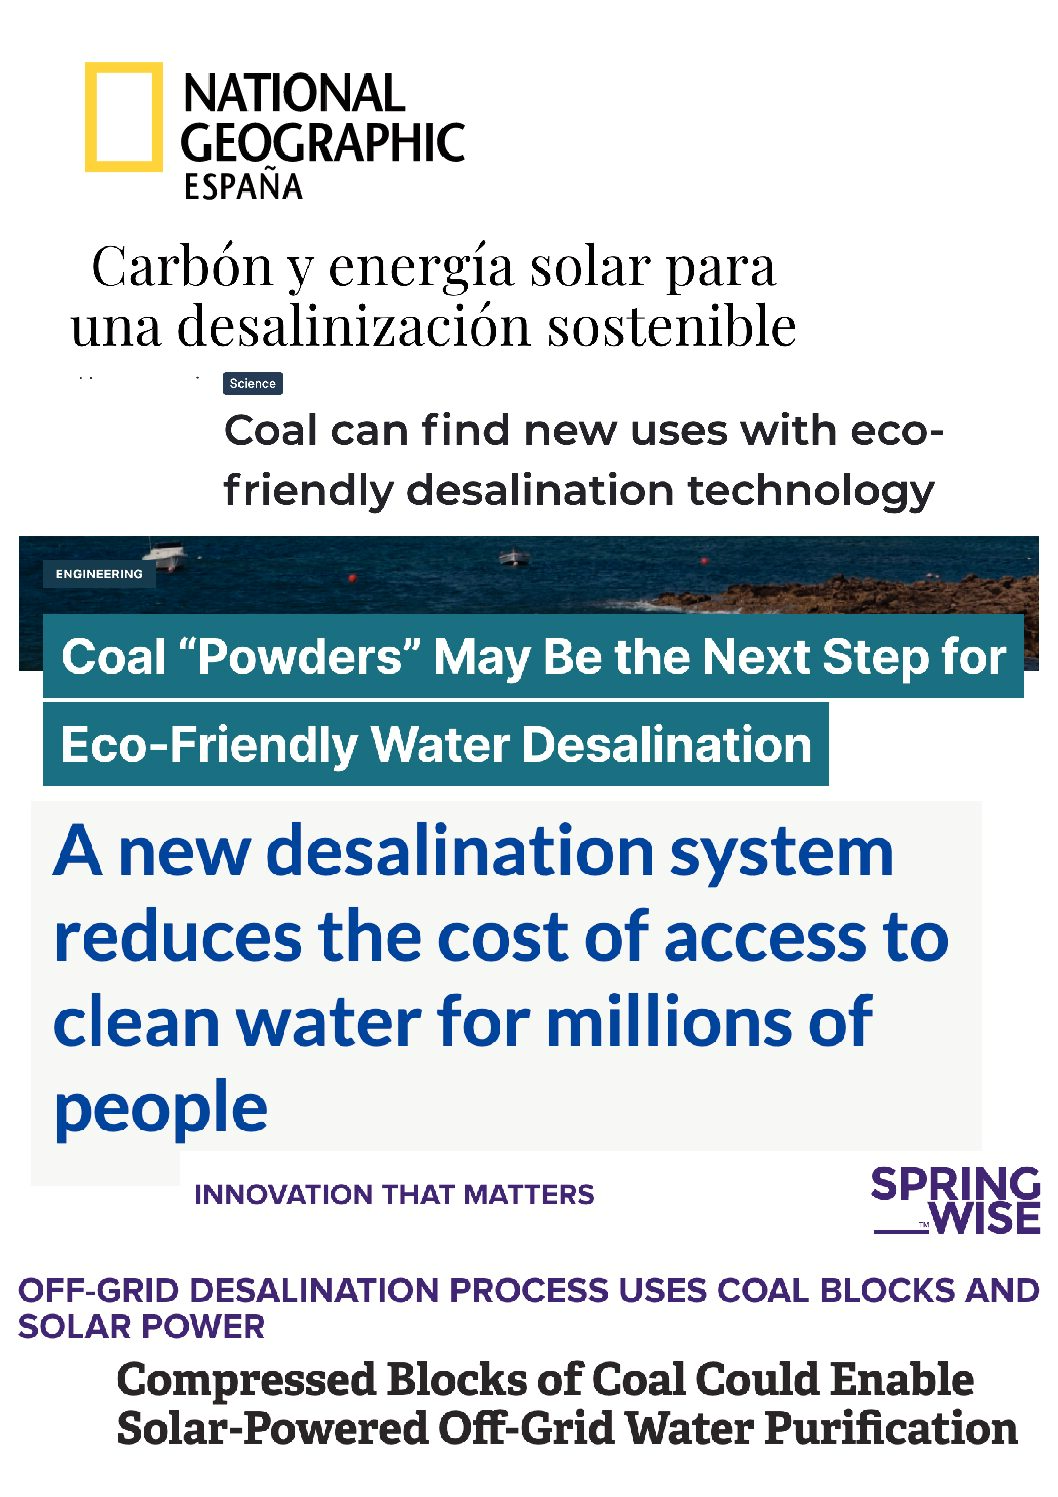 A new sustainable green cycle for coal in enhanced water economy